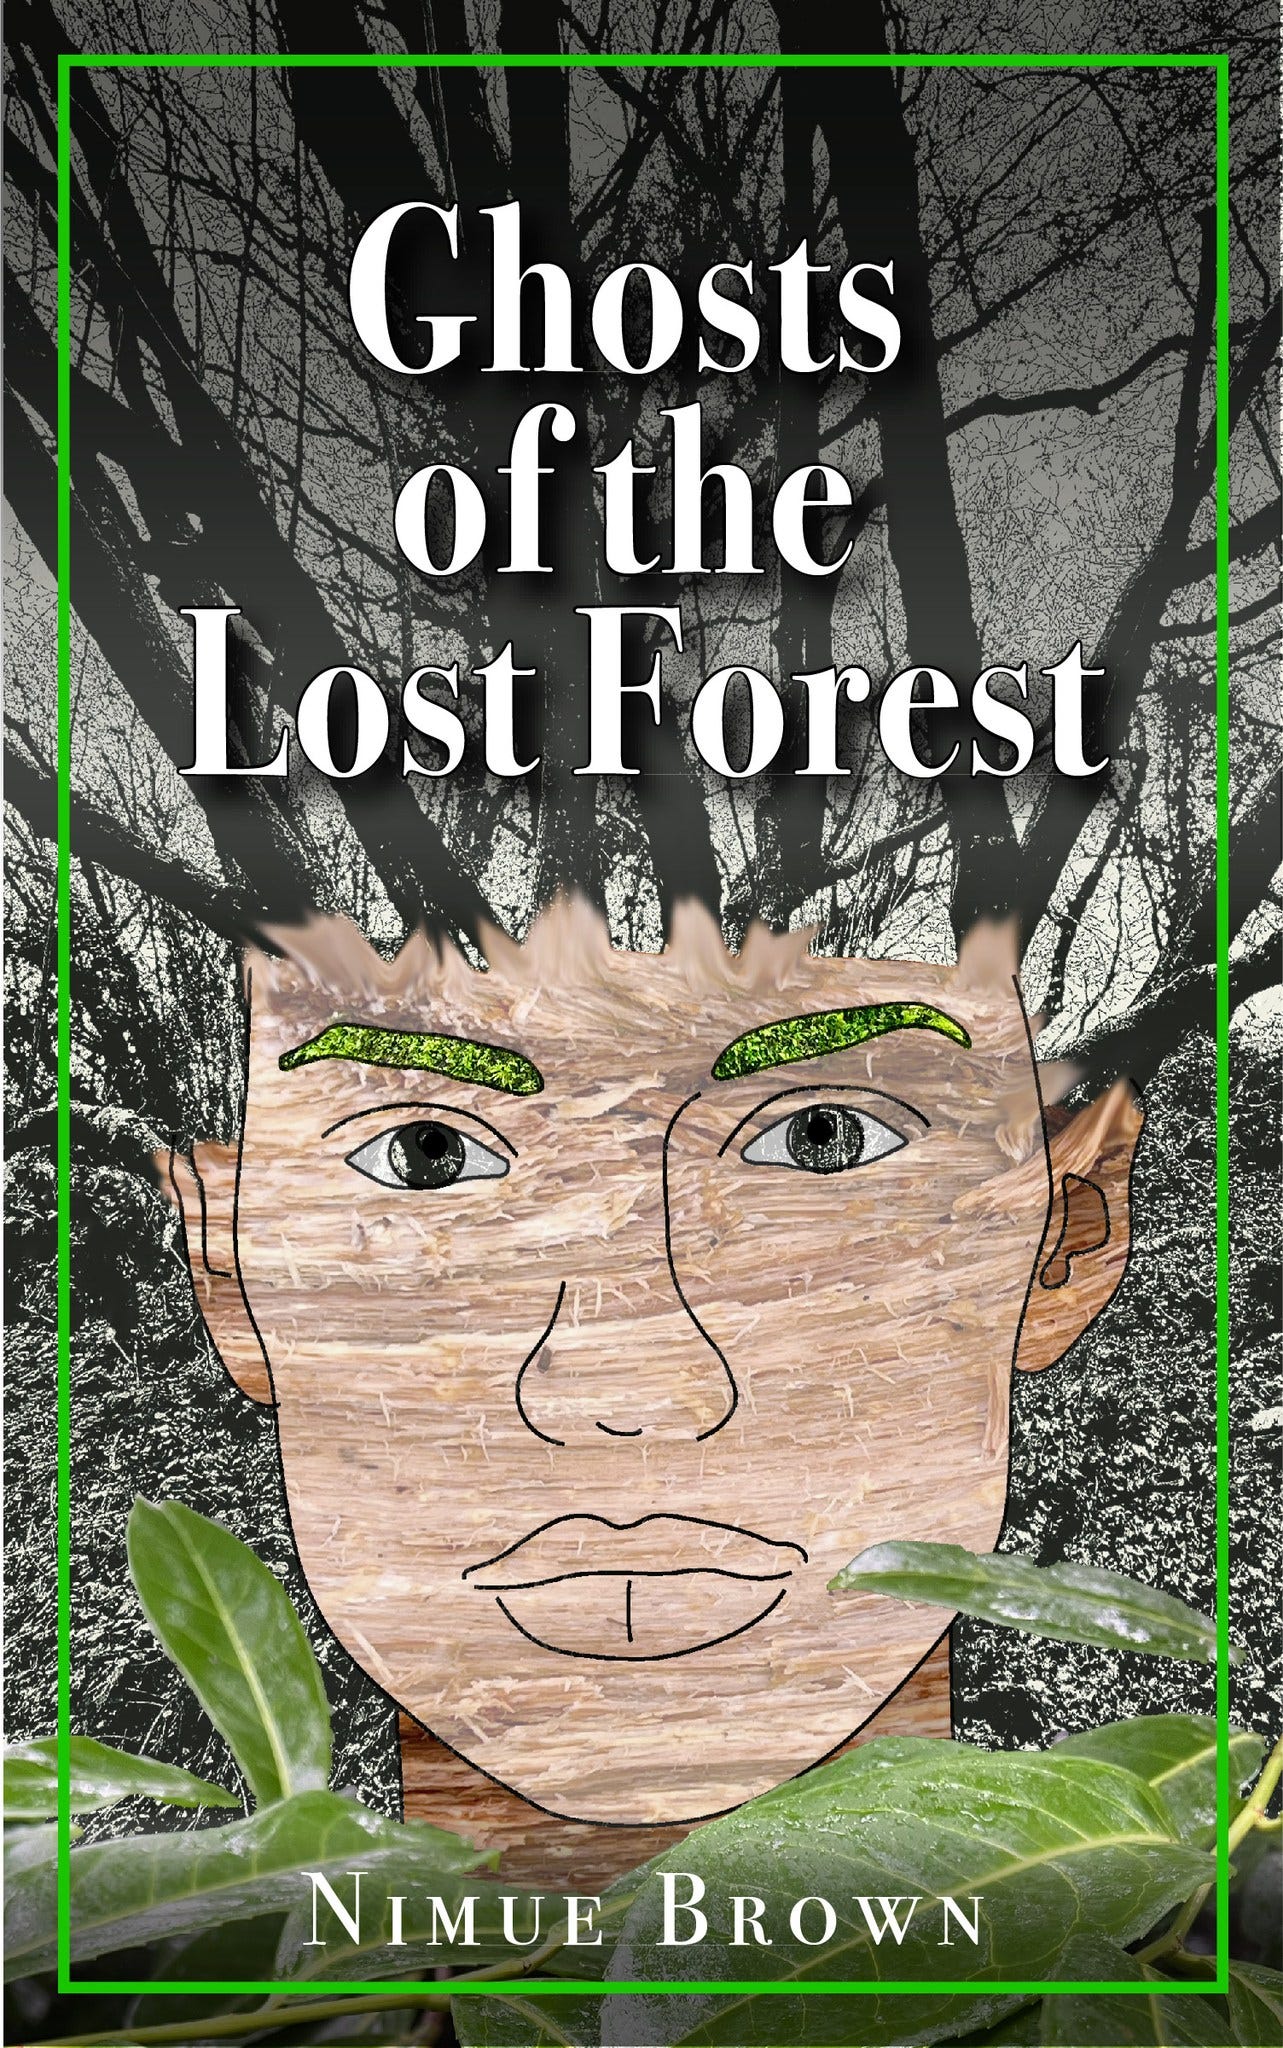 Book cover of Ghosts of the Lost Forest by Nimue Brown, with a human face merging into forest growth